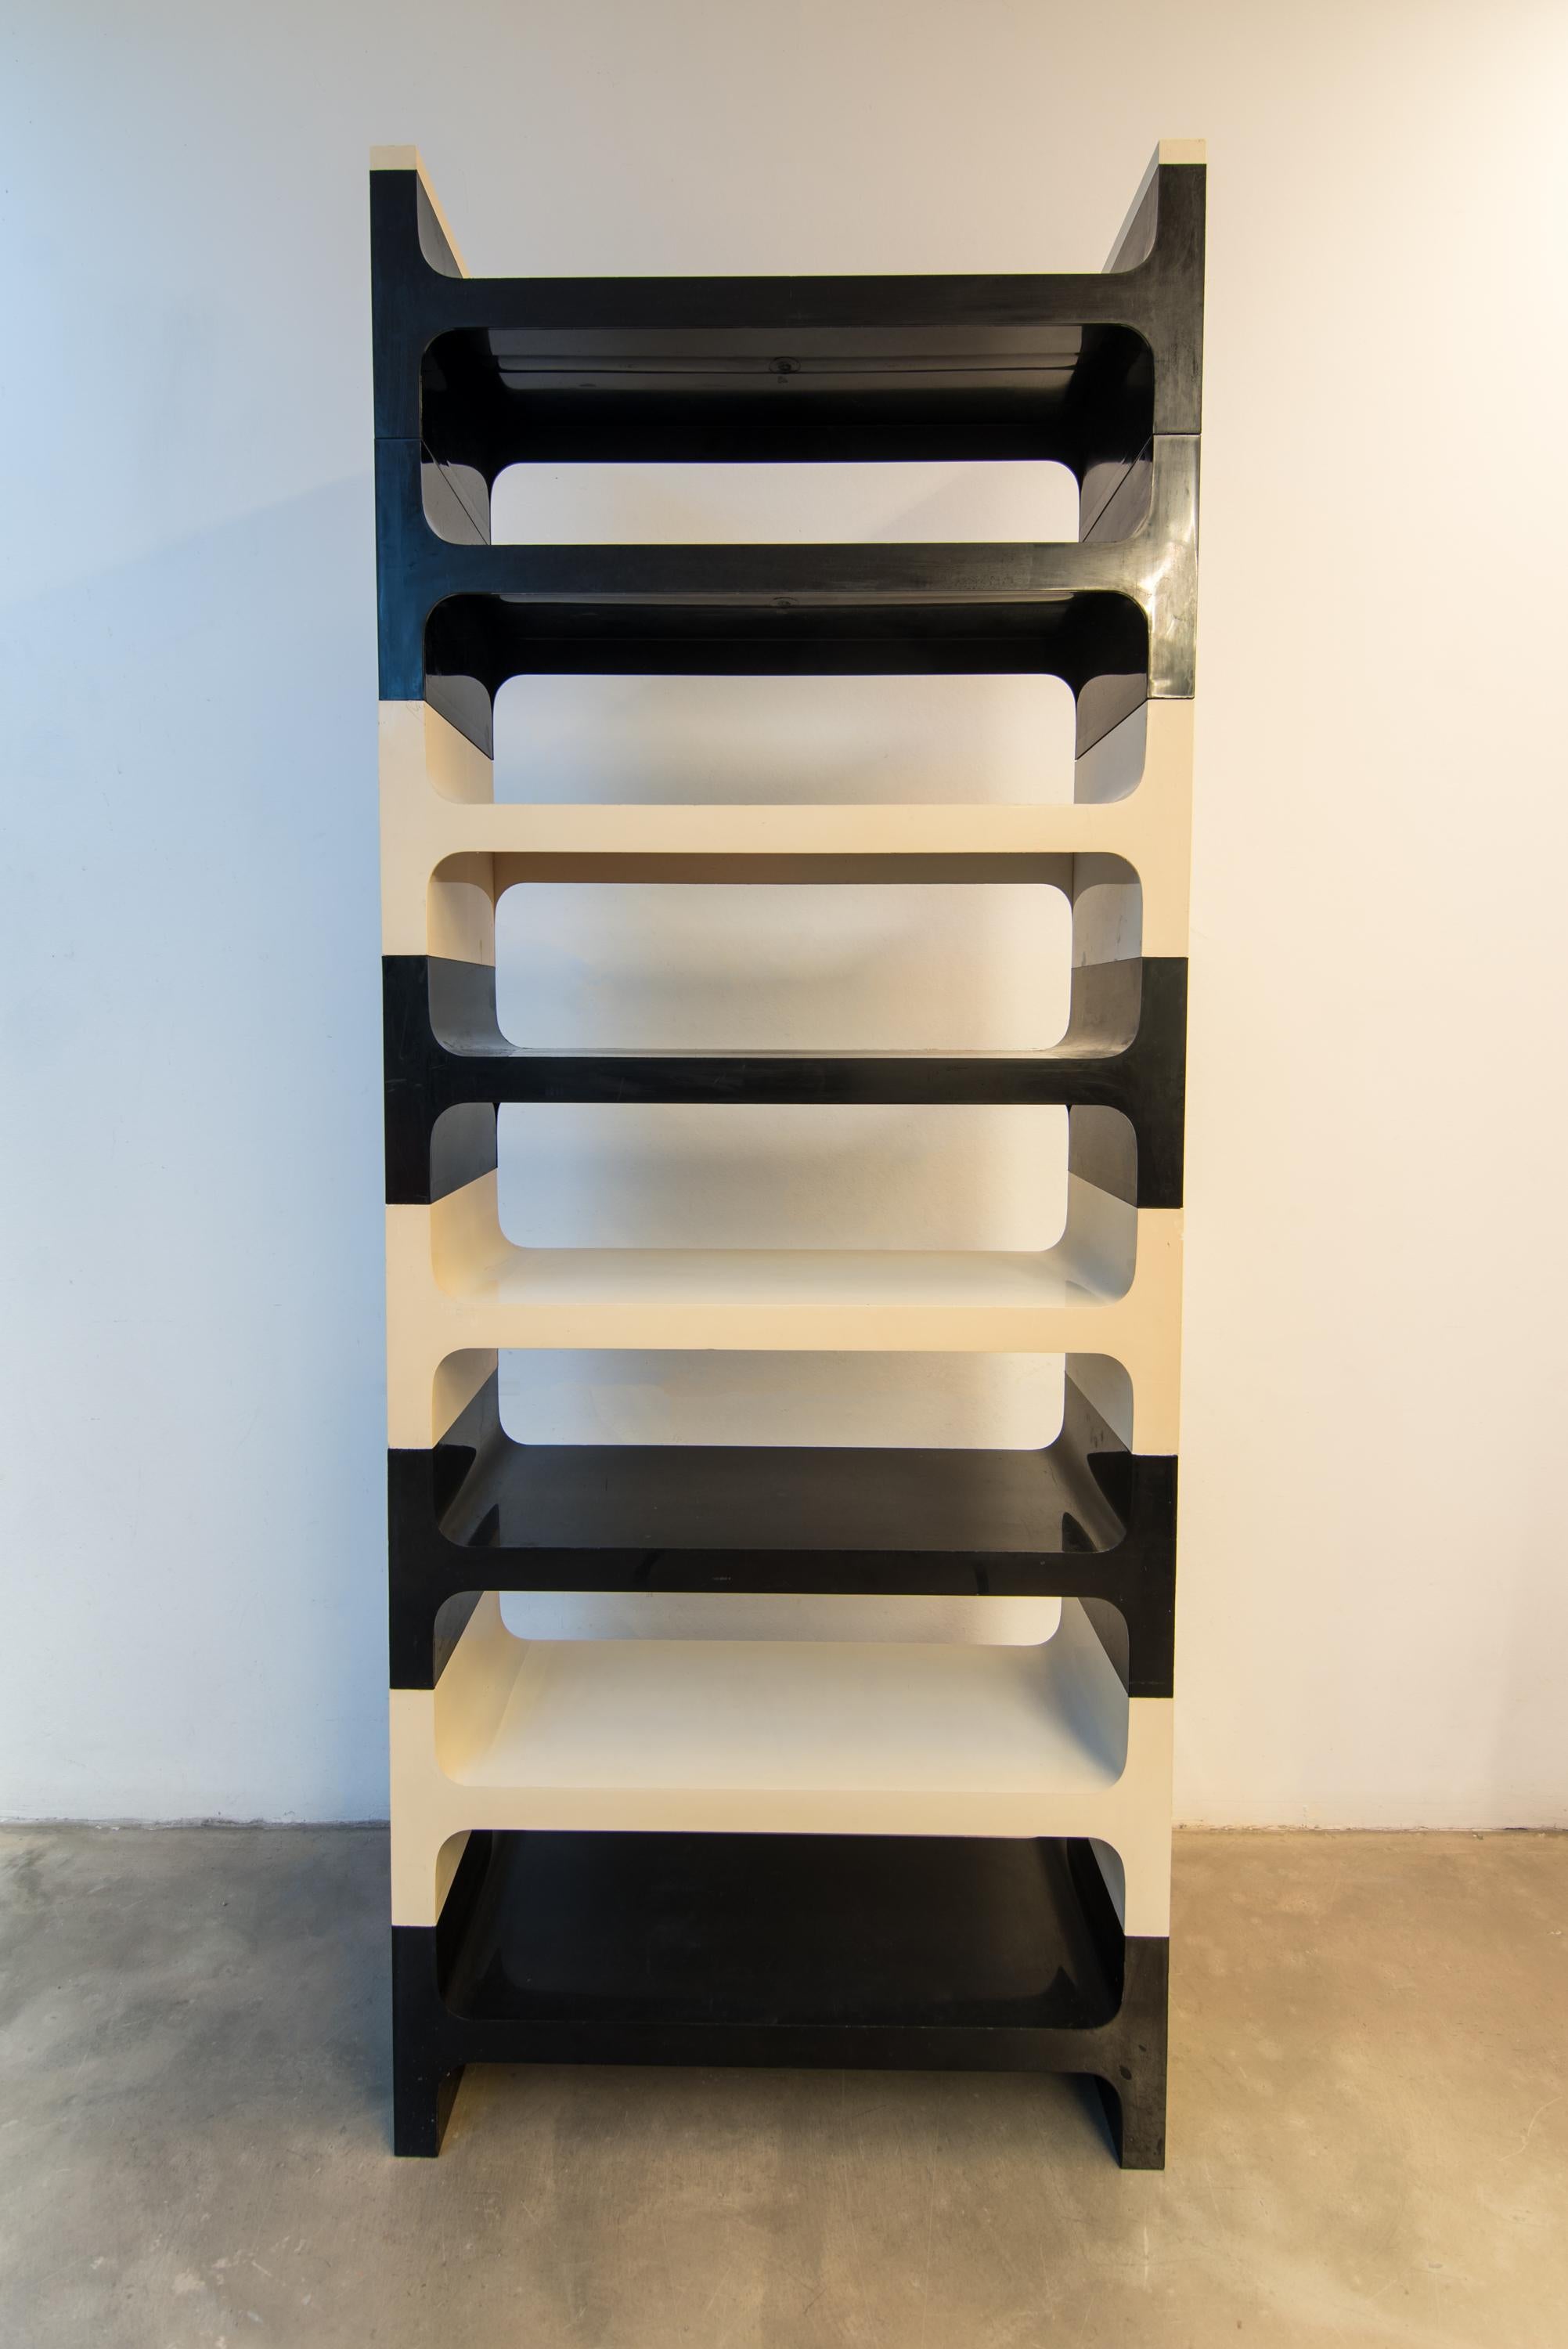 Vardani Design stacking shelf unit, Italy 1970s.
System consists in: 16 shelves, 3 round corners of three different colors (Black/White/Orange).

No breaks or repairs. Some tape residue. Some light surface scratches. Comprised of twenty-three